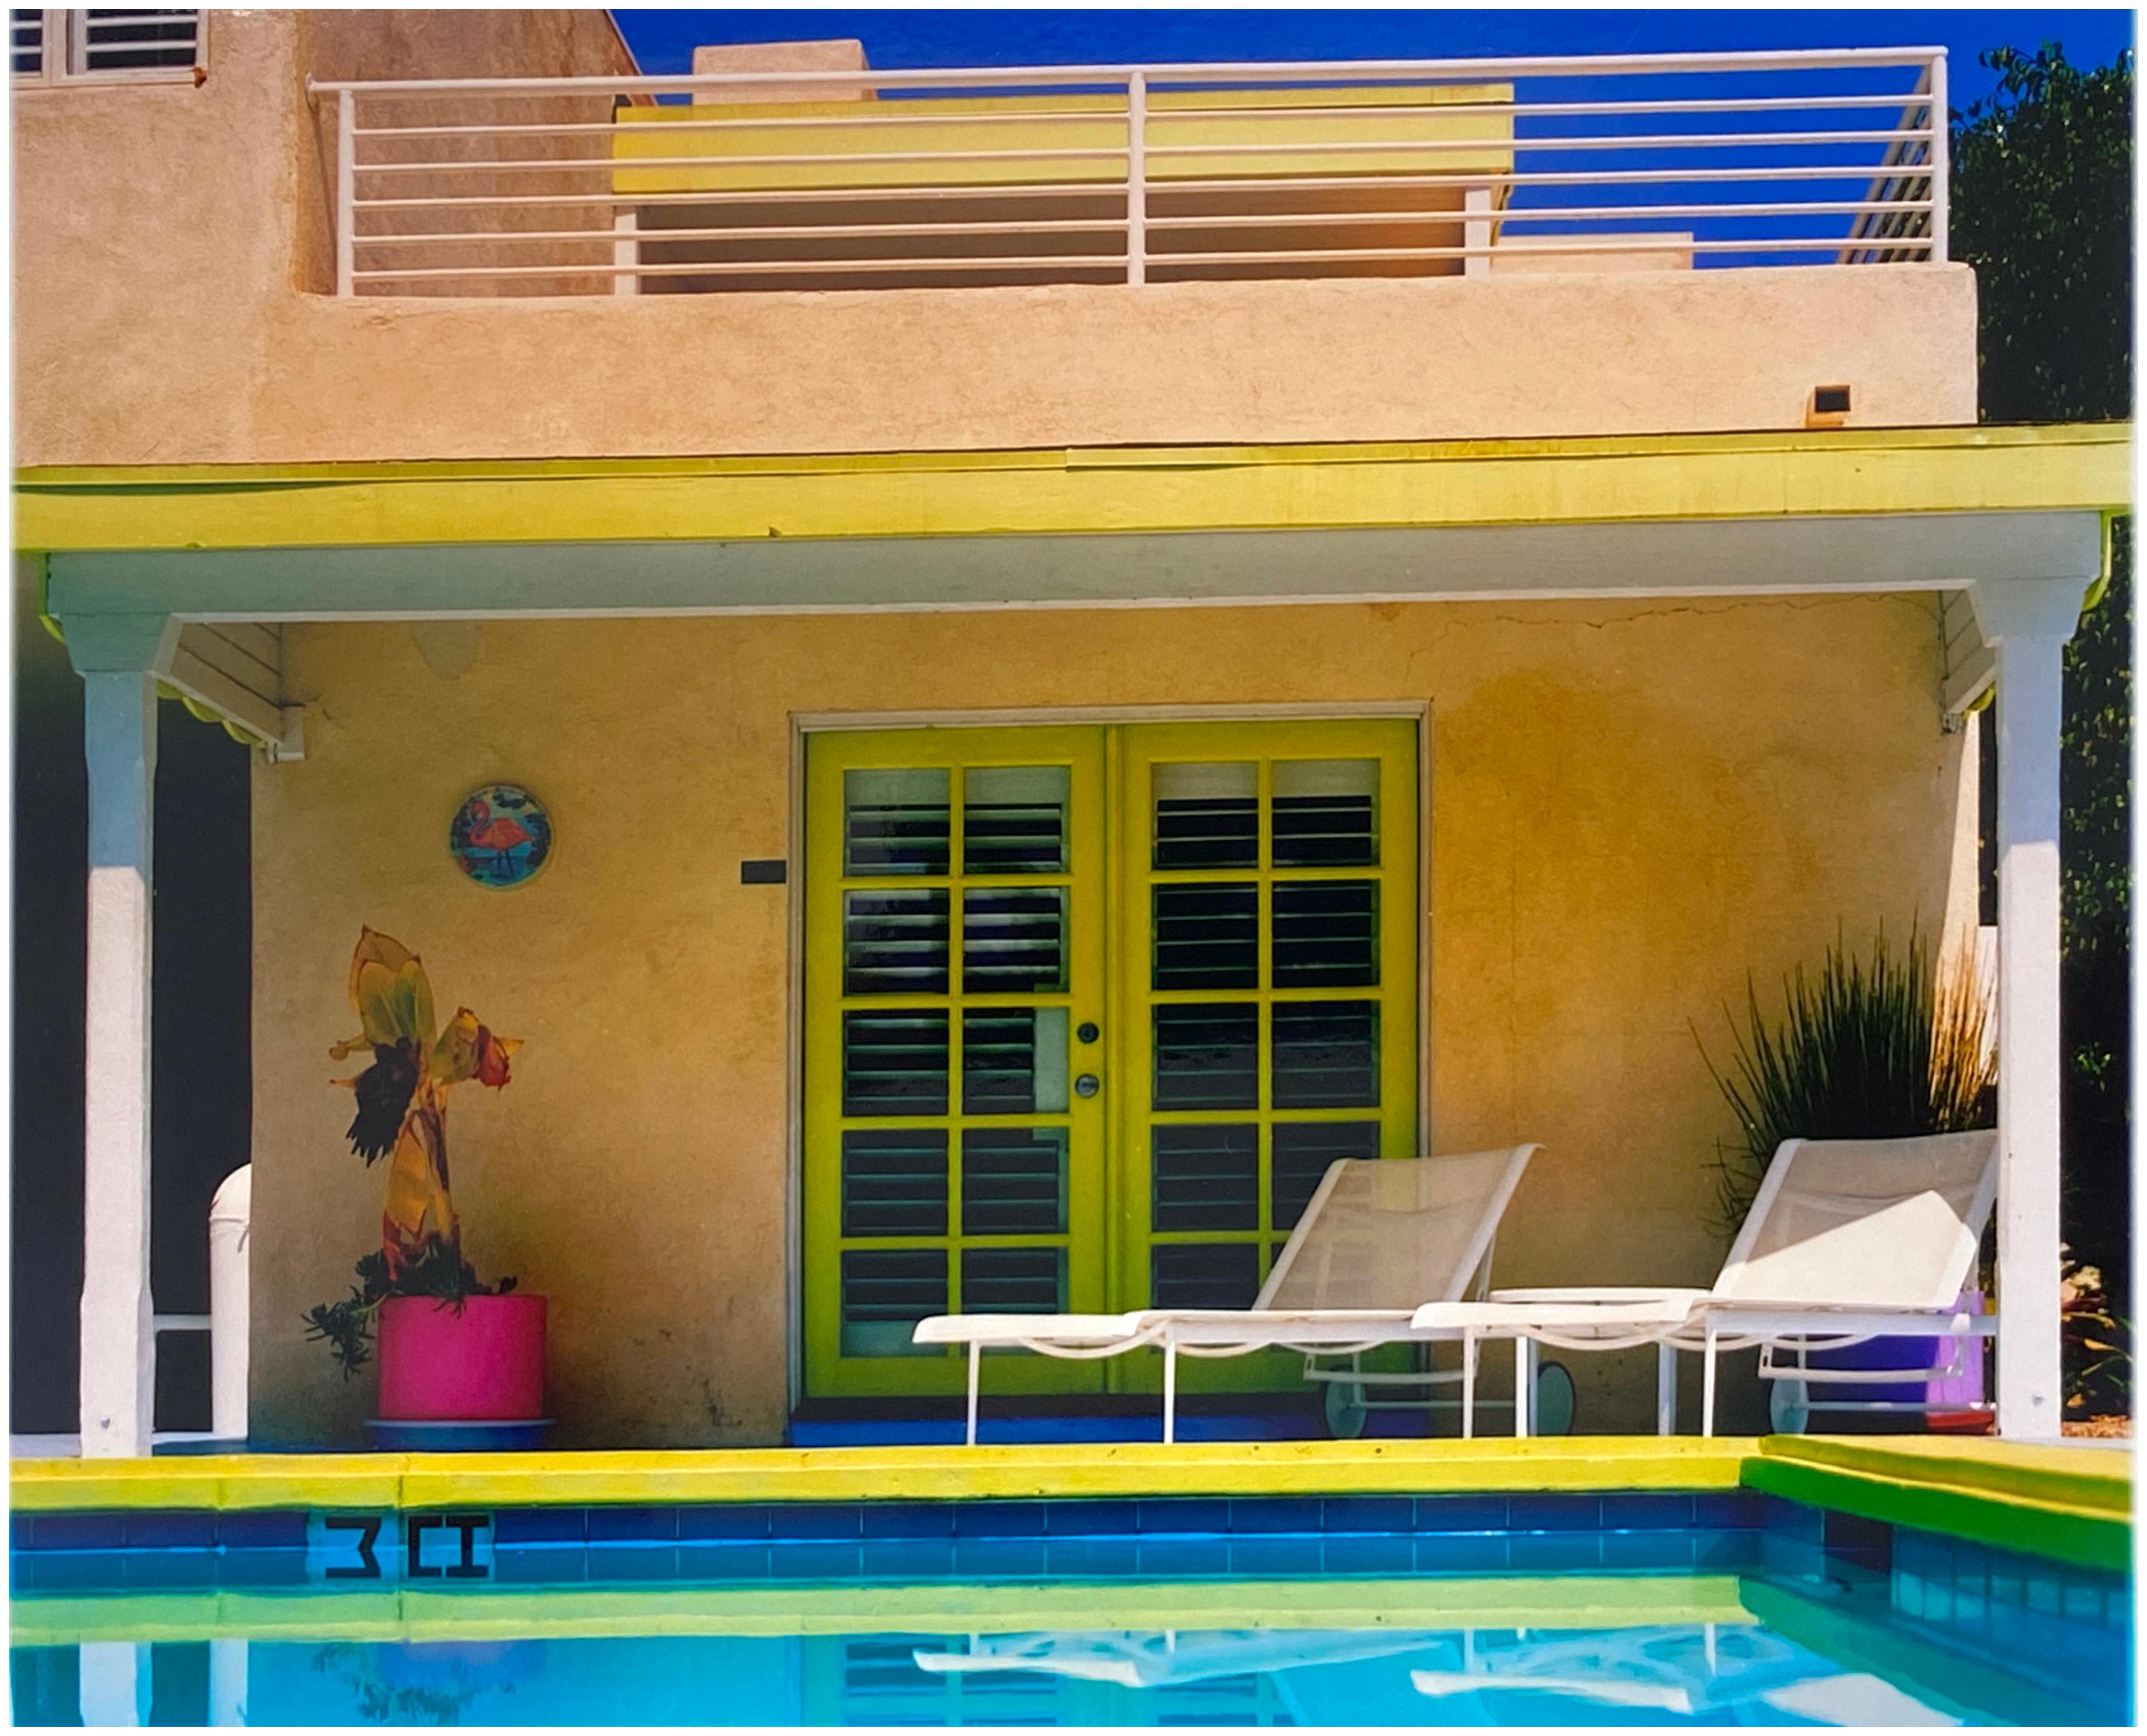 Richard Heeps Landscape Photograph - Palm Springs Poolside II, California - American Architecture Color Photography